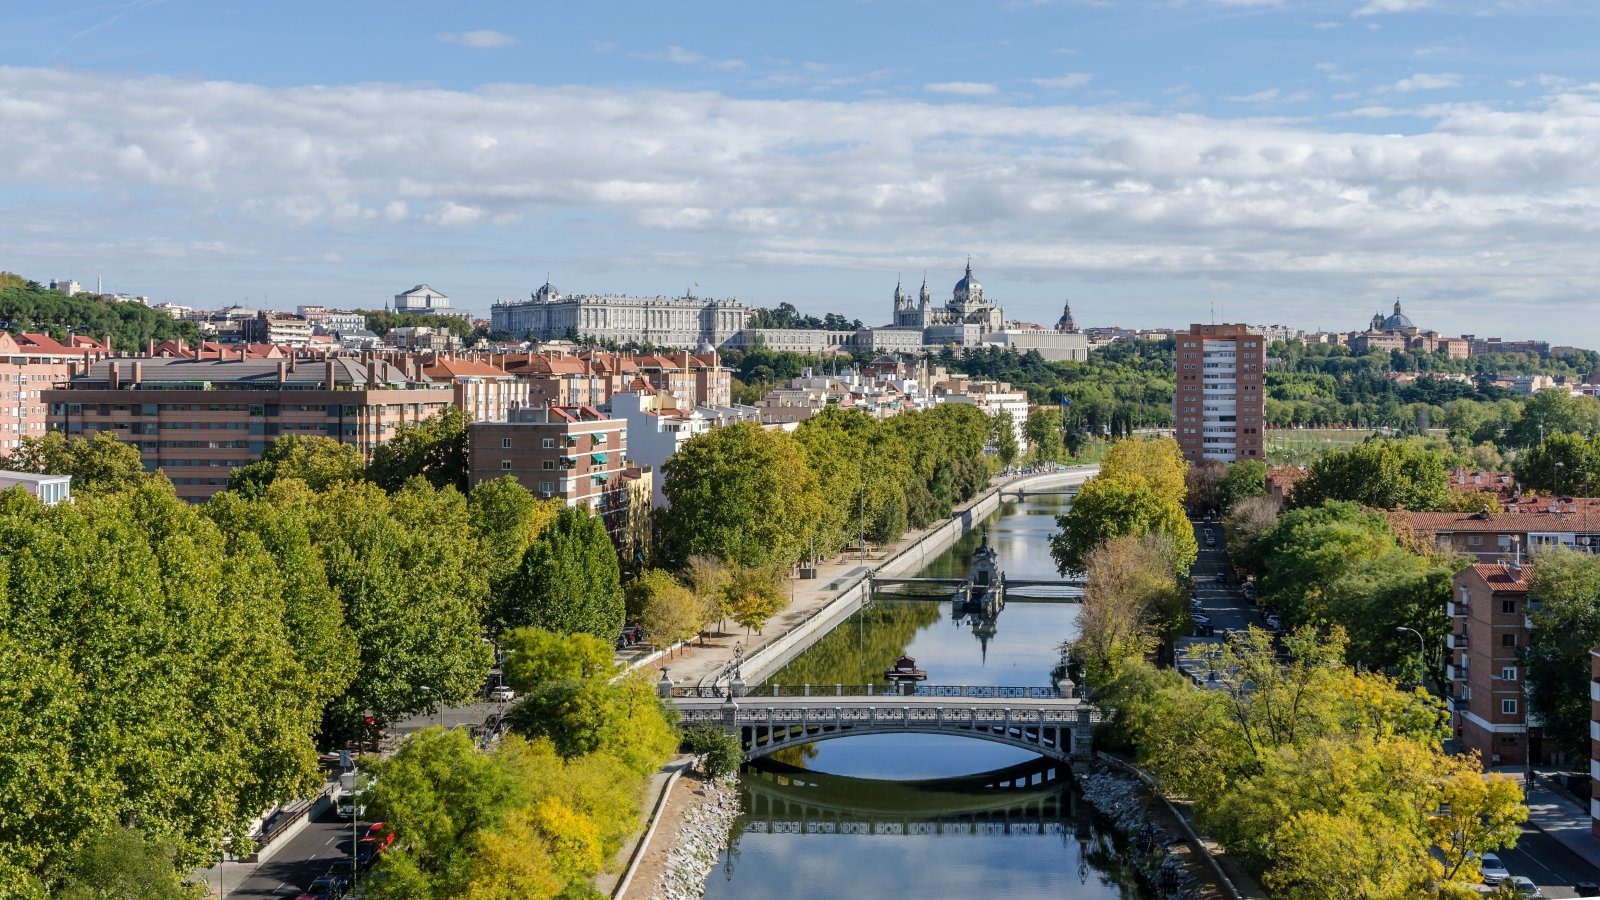 View_of_Madrid_and_Río_Manzanares_from_Téleferico_20111029_1.jpg